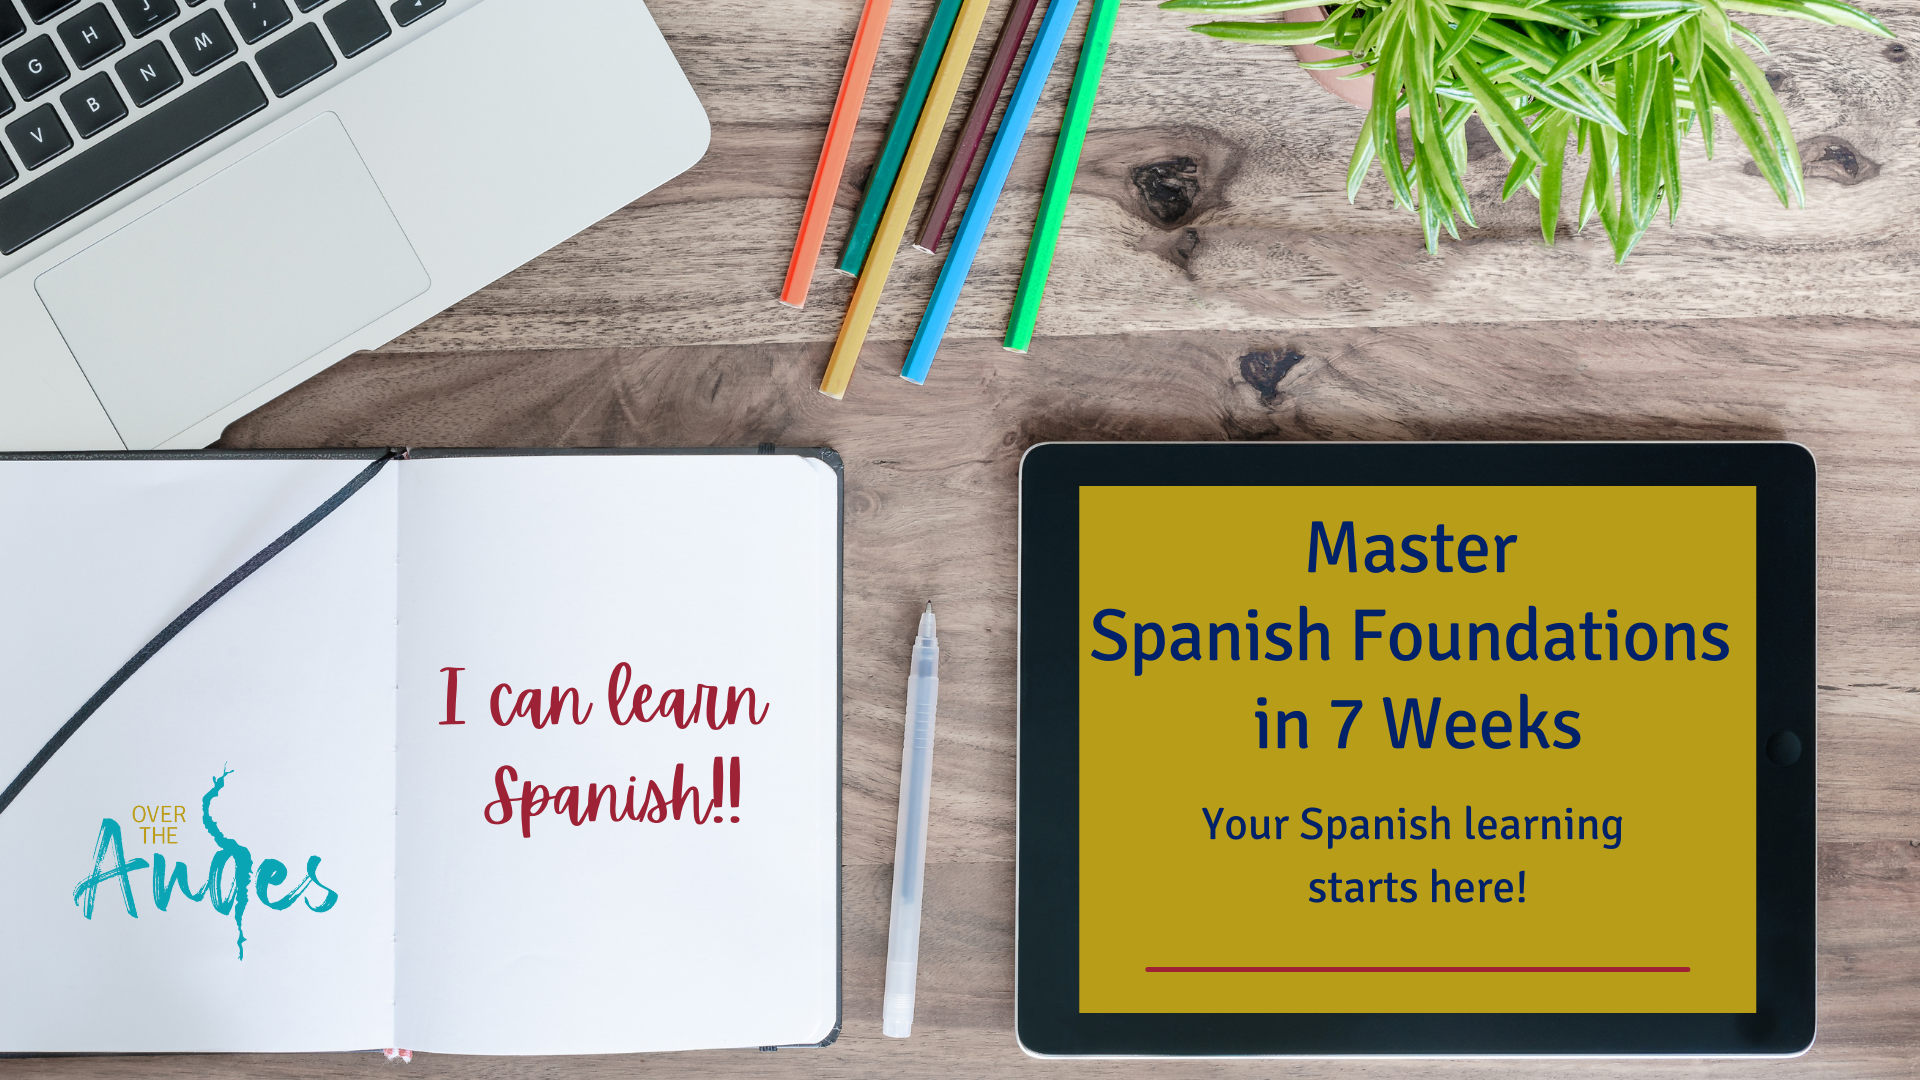 This is where to start learning Spanish | Master Spanish Foundations in 7 weeks